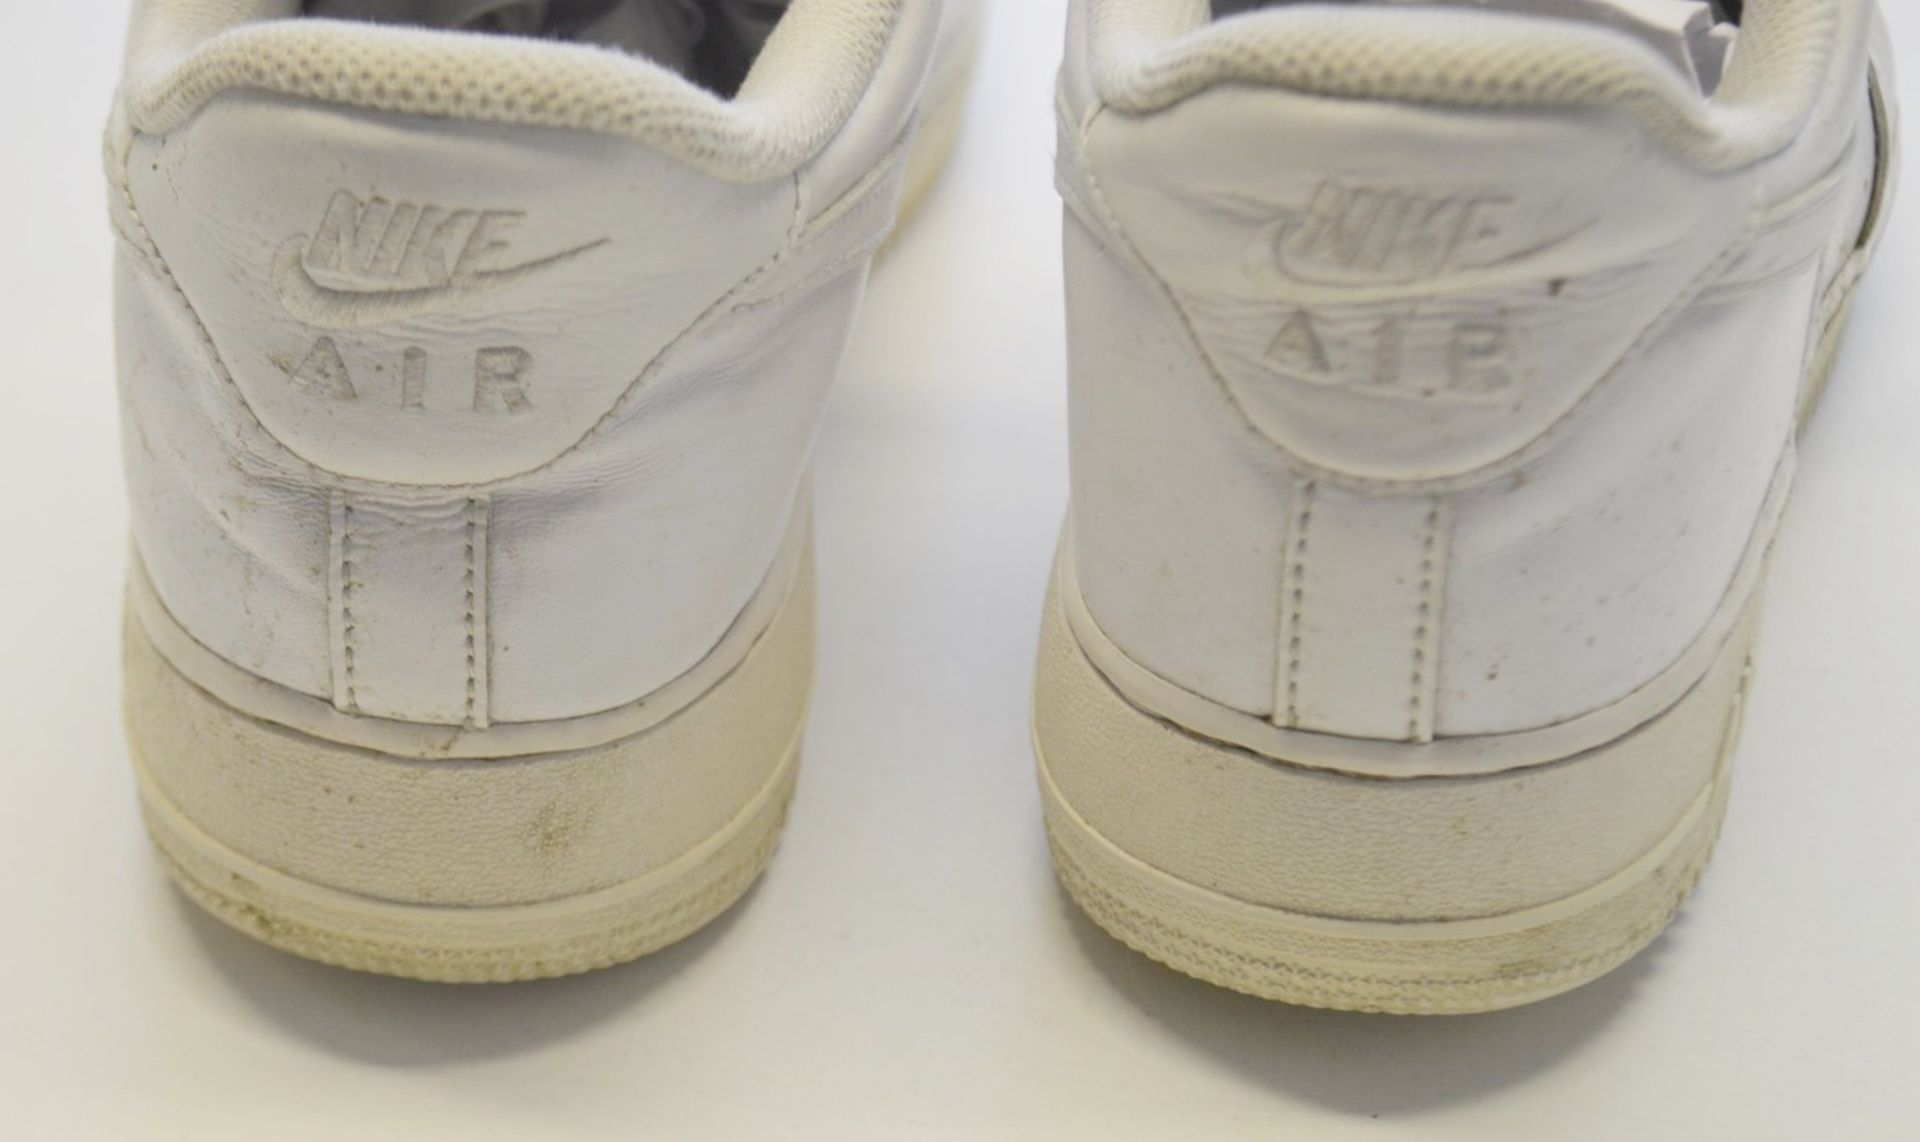 1 x Pair Of Men's Genuine Nike 'Air Force 1 Low' Trainers In White - Size (EU/UK): 44.5/9.5 - - Image 7 of 9